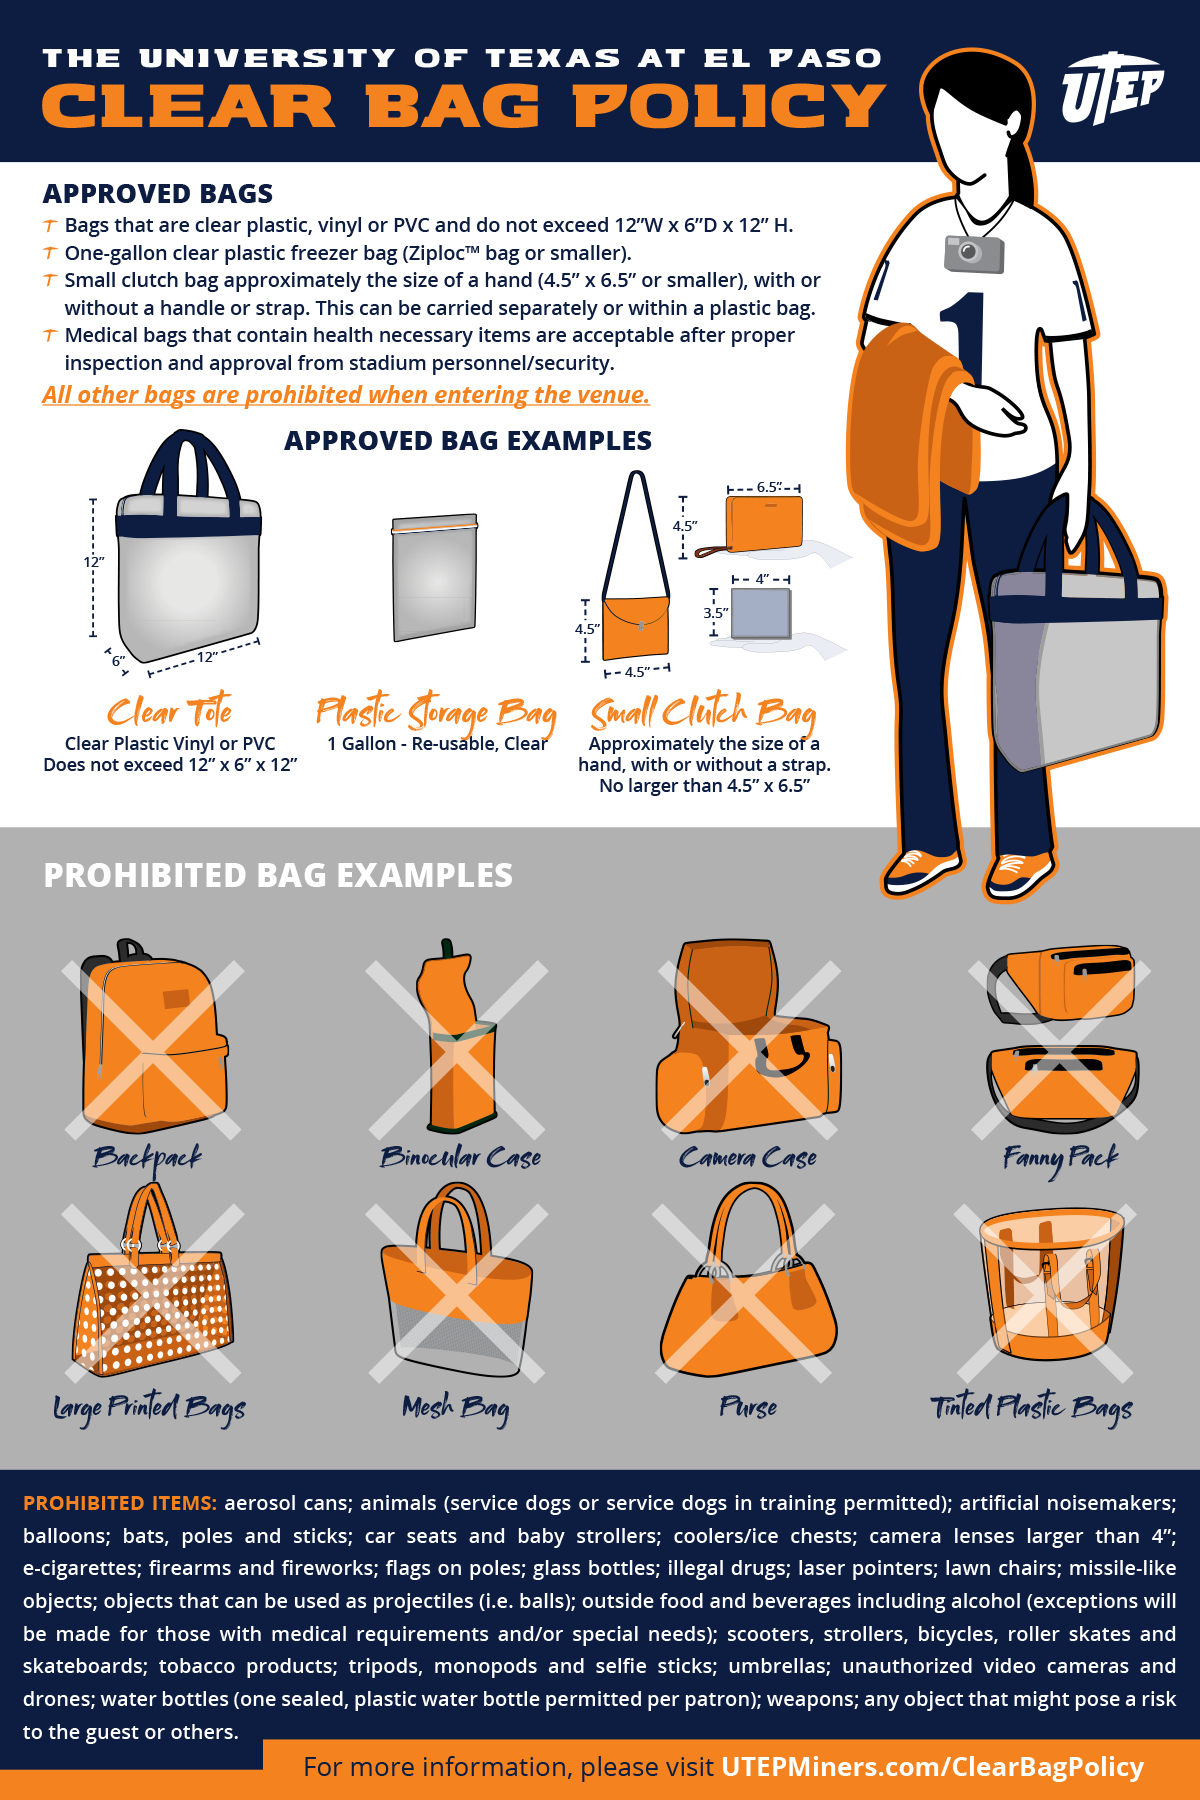 clear-bag-policy-utep-office-of-special-events-el-paso-texas